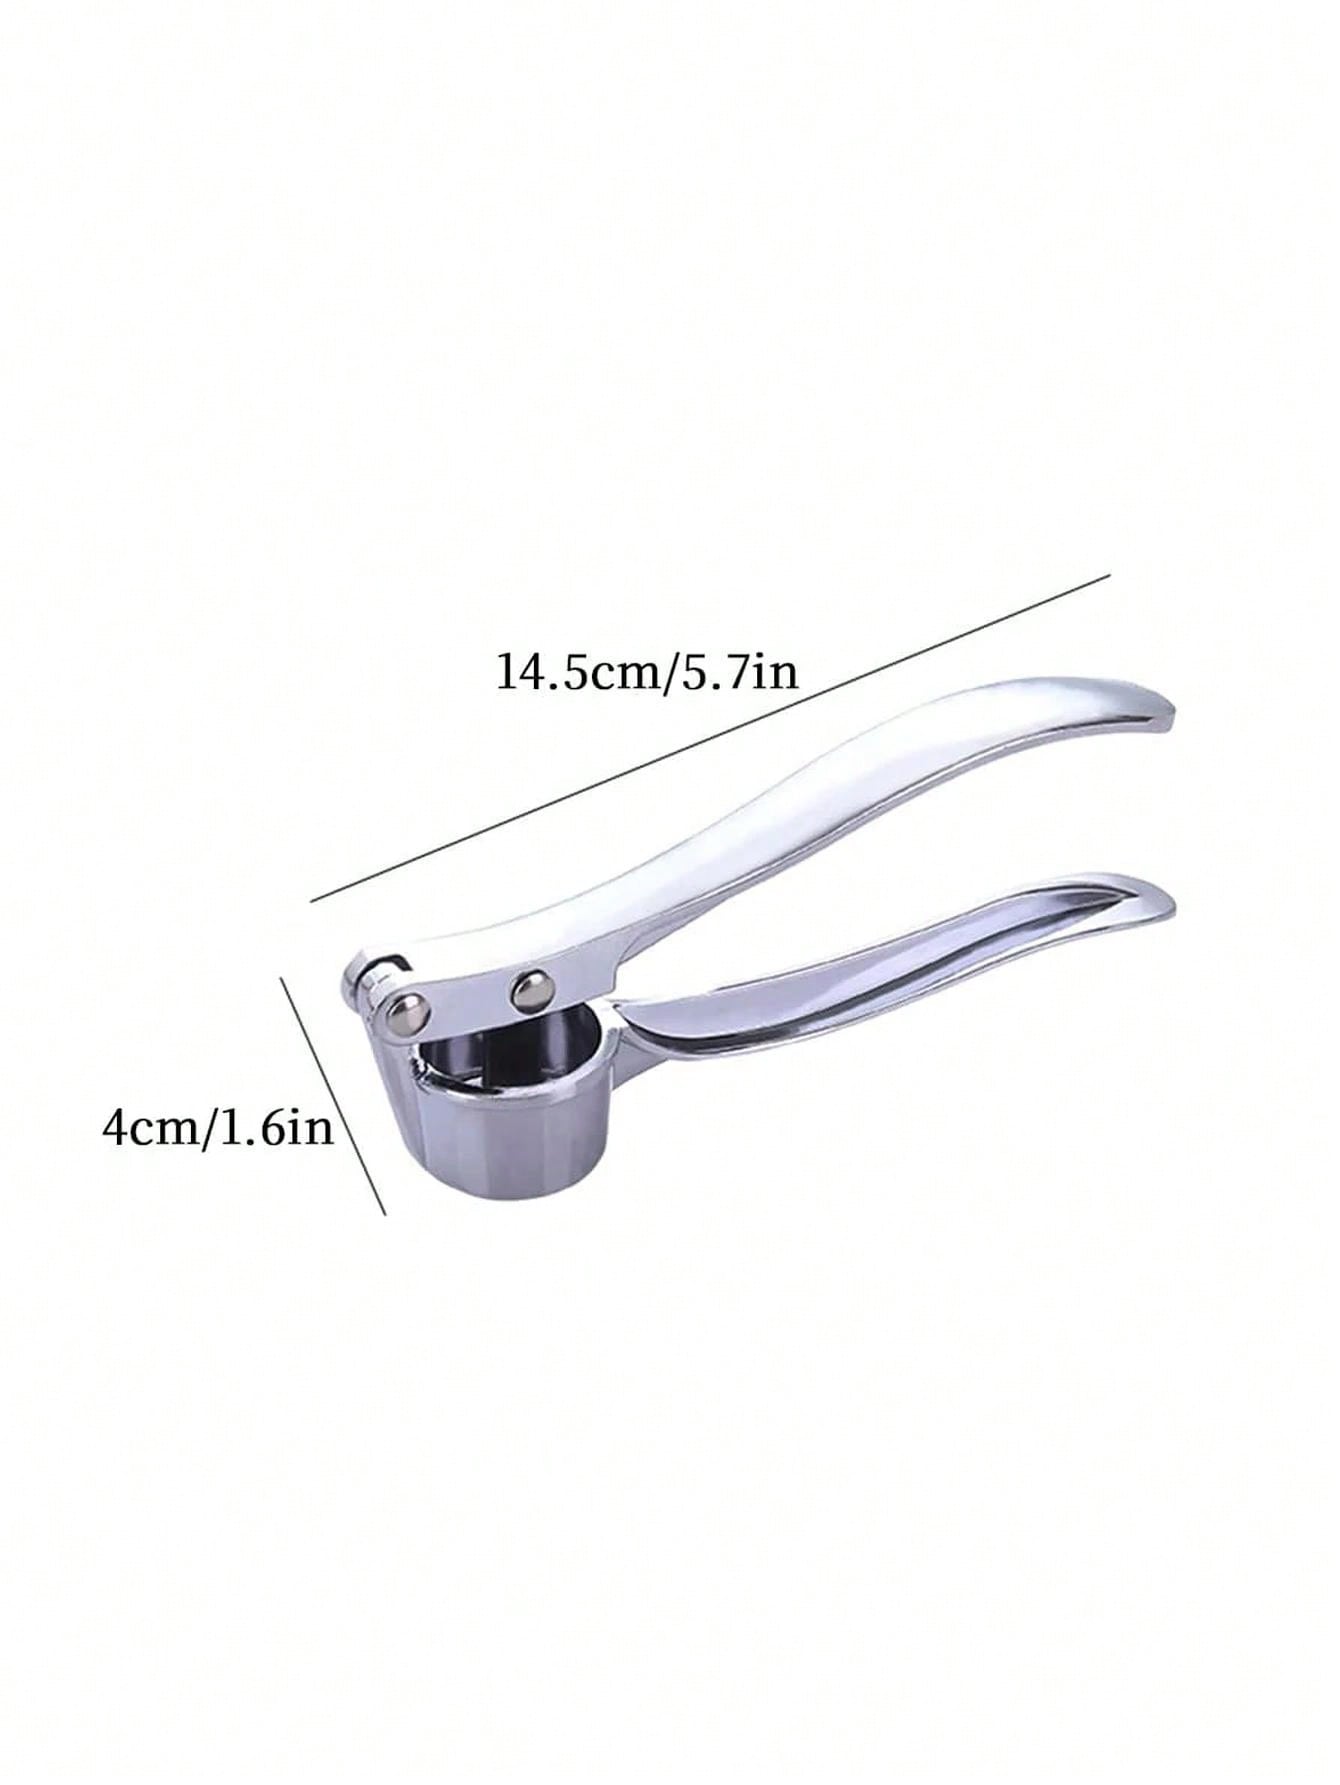 One stainless steel garlic press, a modernist silver multifunctional garlic mincer for the kitchen.